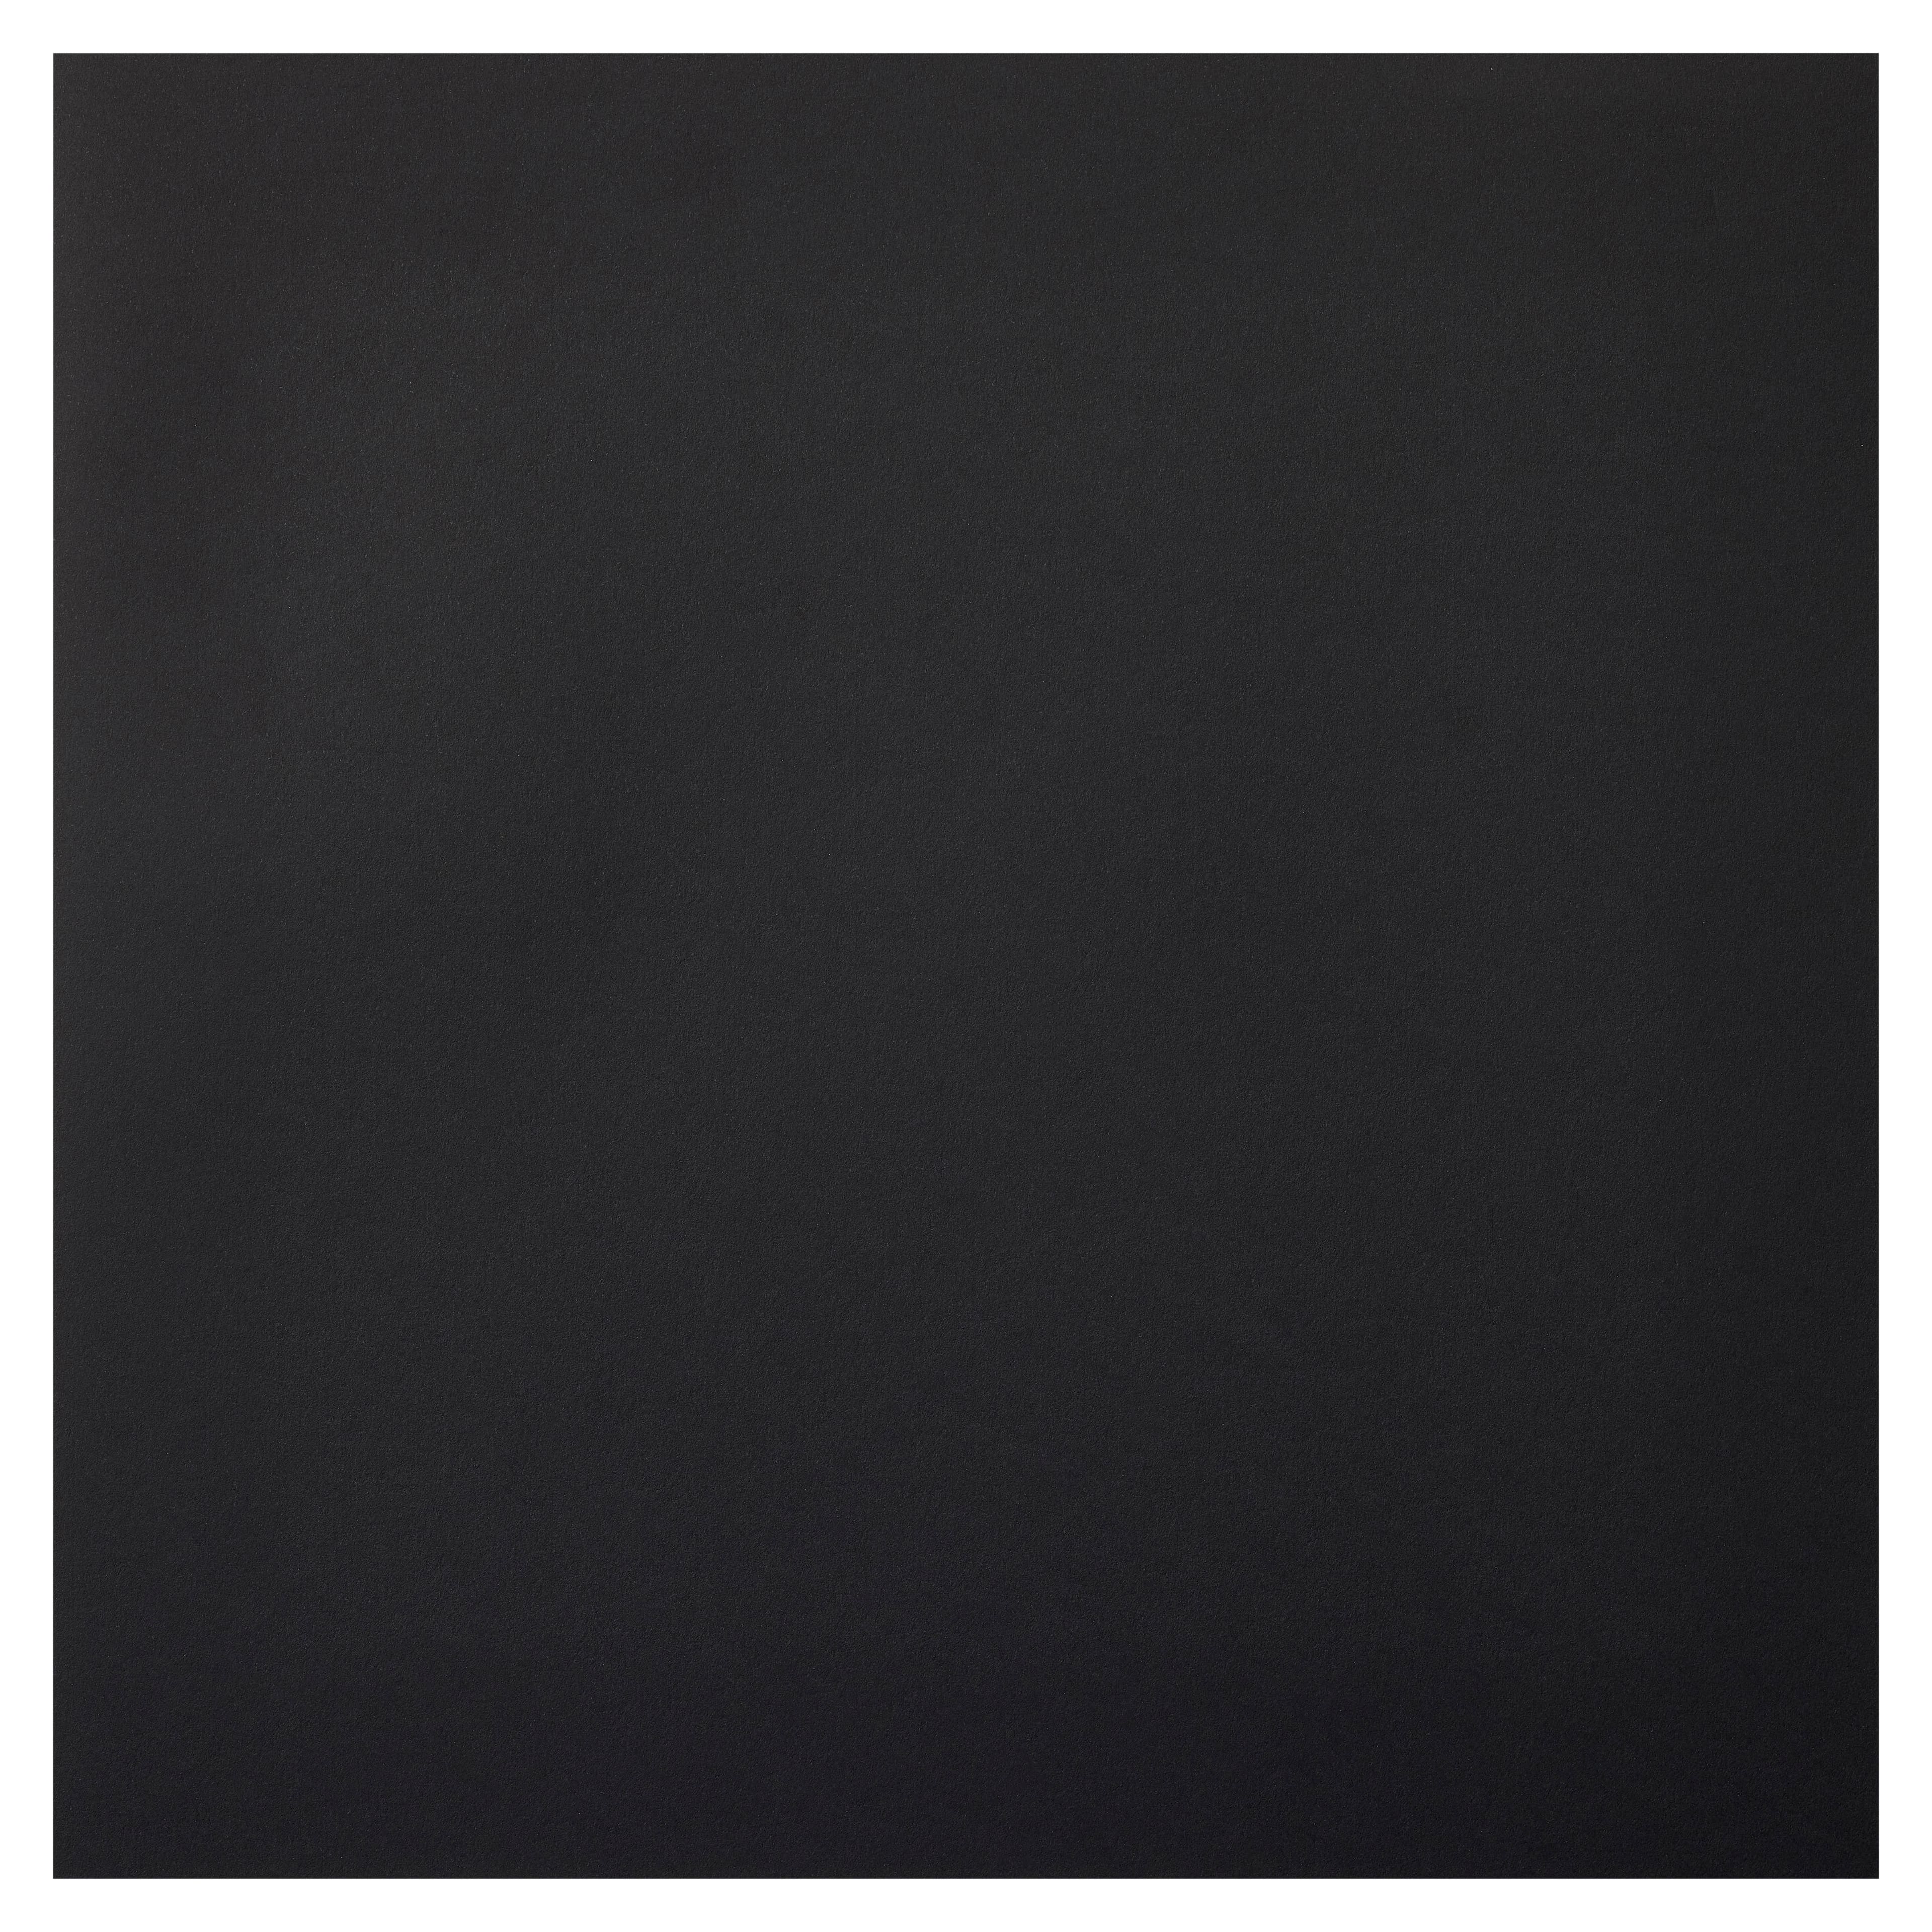 12x12 Black Cardstock Paper Pack - Black Scrapbook Paper 65lb - Double Sided Card Stock for Crafts, Embossing, Cardmaking - 40 Sheets, Solid Core